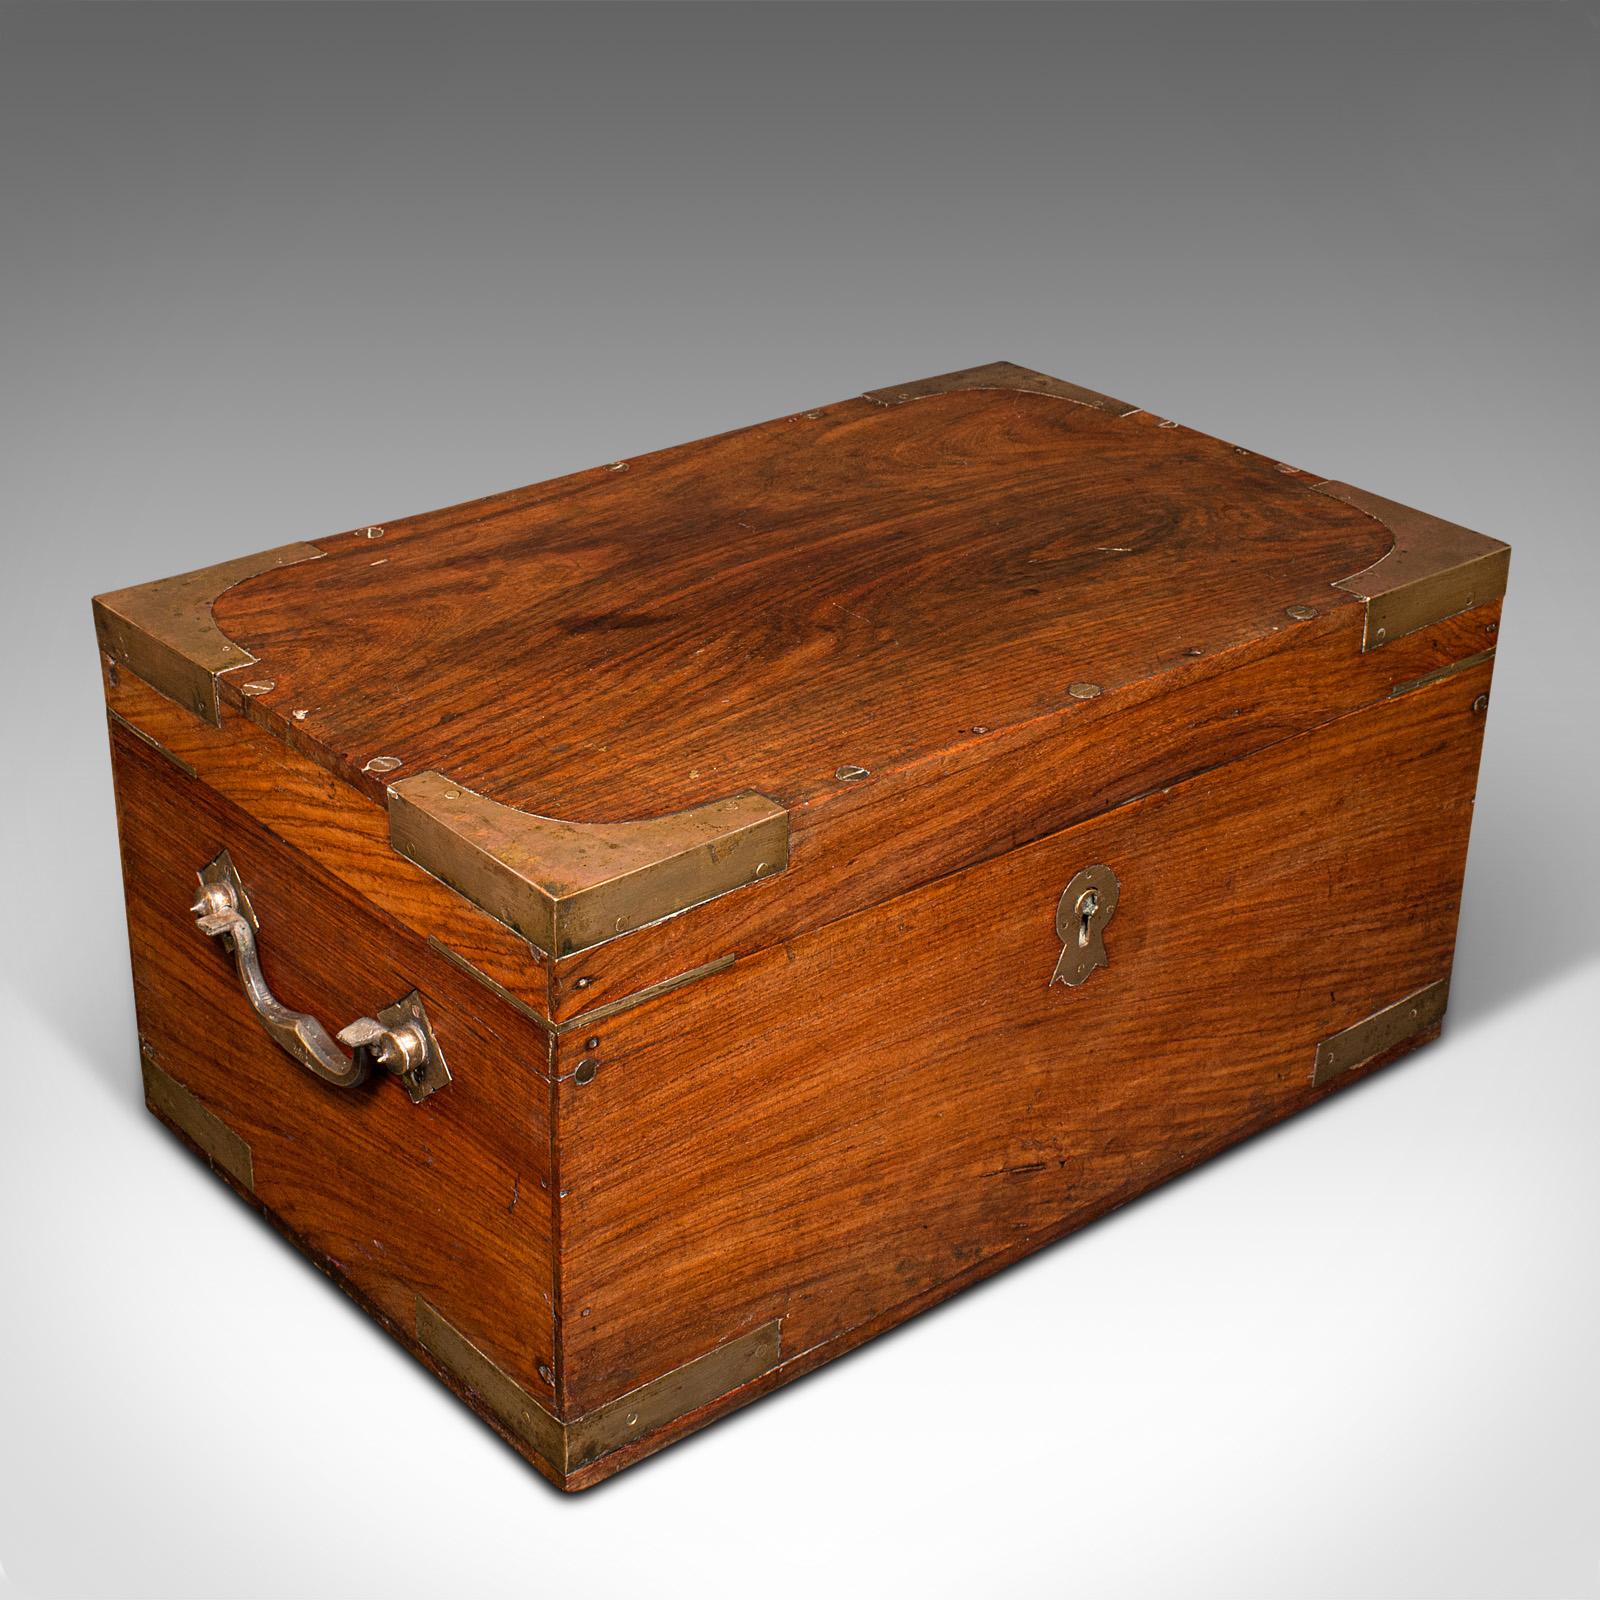 This is an antique Campaign correspondence box. An Anglo-Indian, teak and brass bound Colonial traveller's writing case, dating to the late Victorian period, circa 1880.

Captivatingly appointed interior, set within a quality bound case
Displays